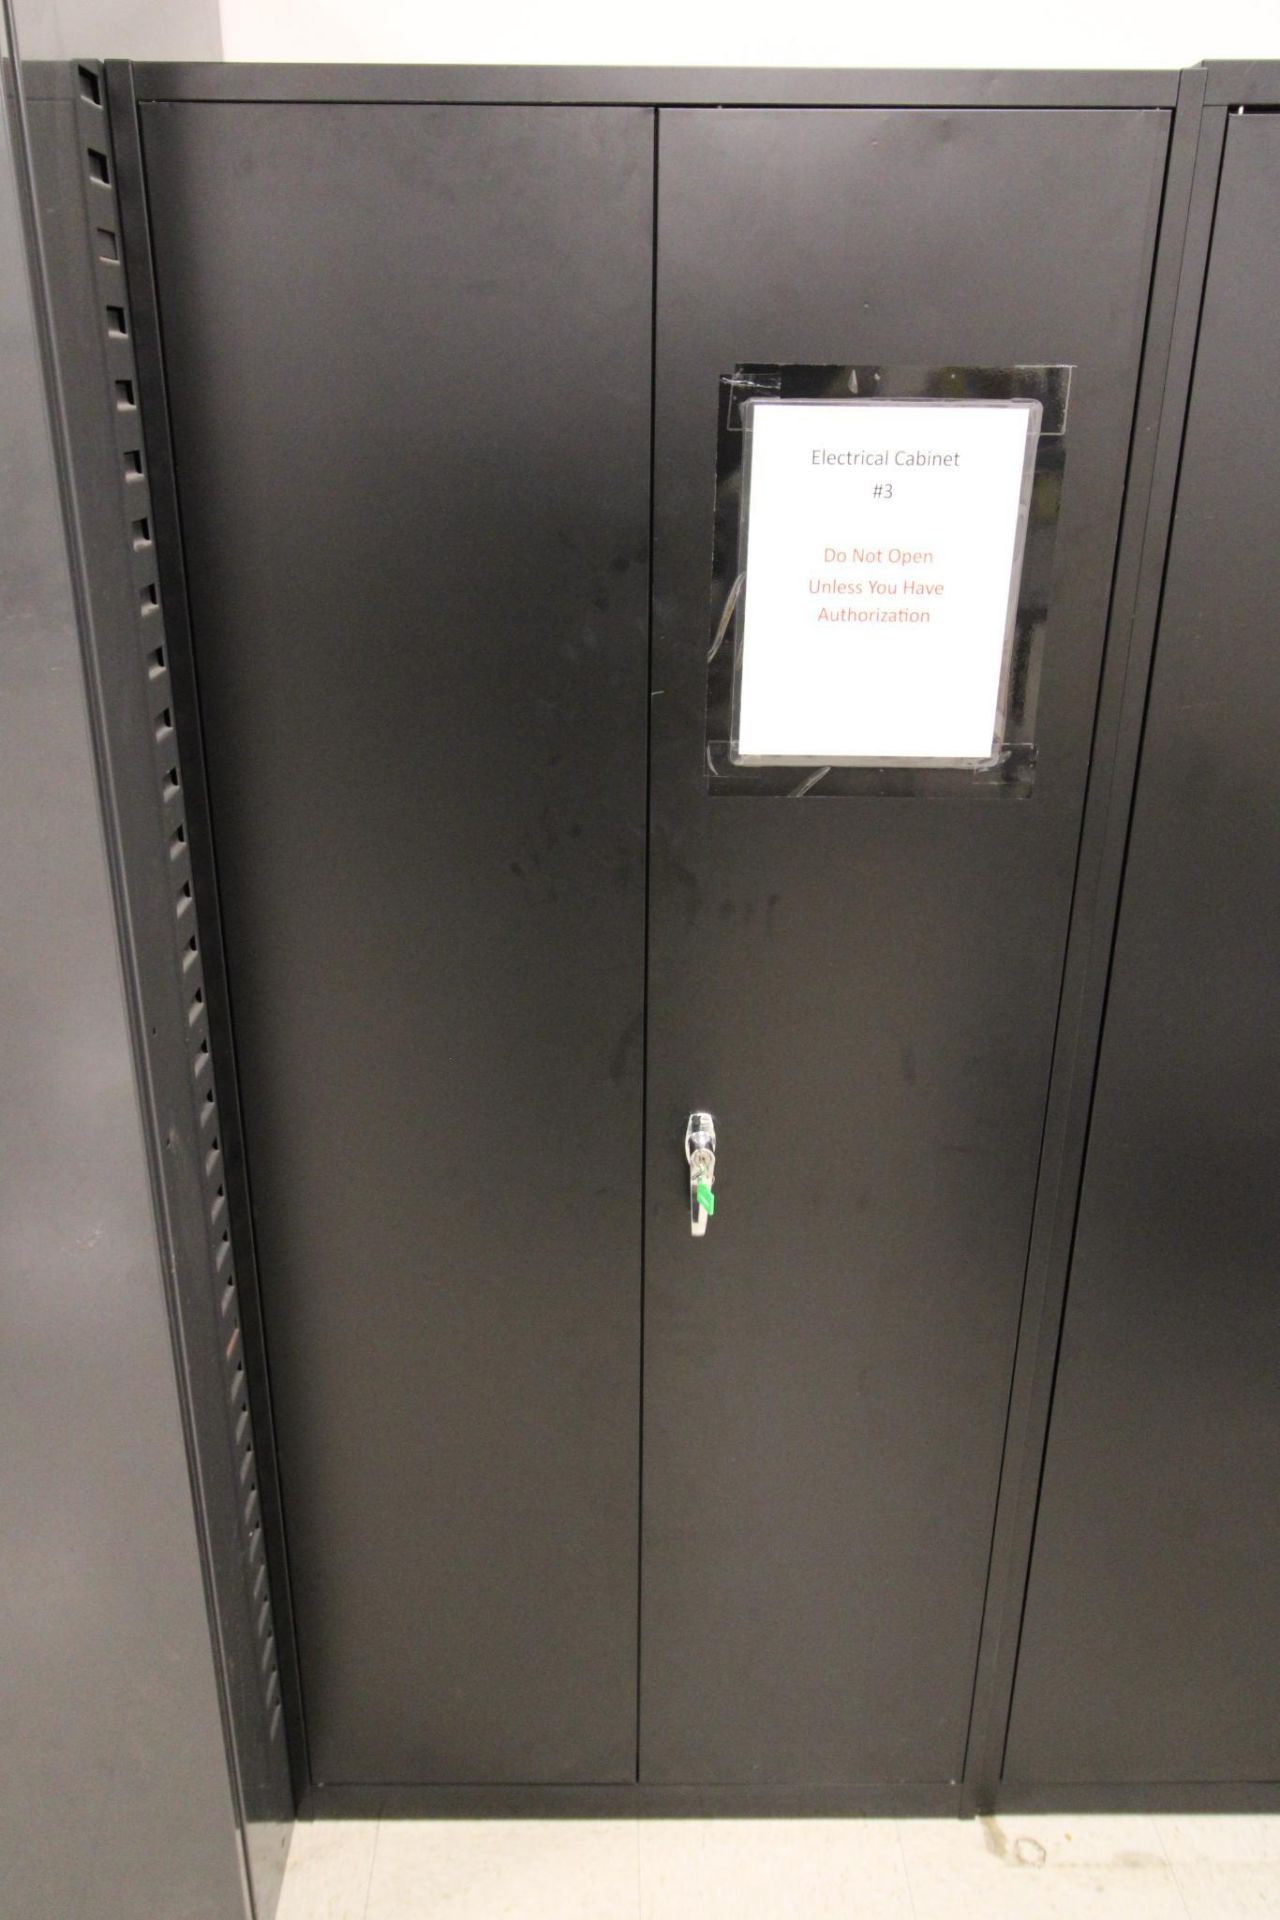 STORAGE CABINET WITH FUSES, POWER SUPPLIES, RELAYS AND MORE, 16"deep X 37" wide X 71" ht.